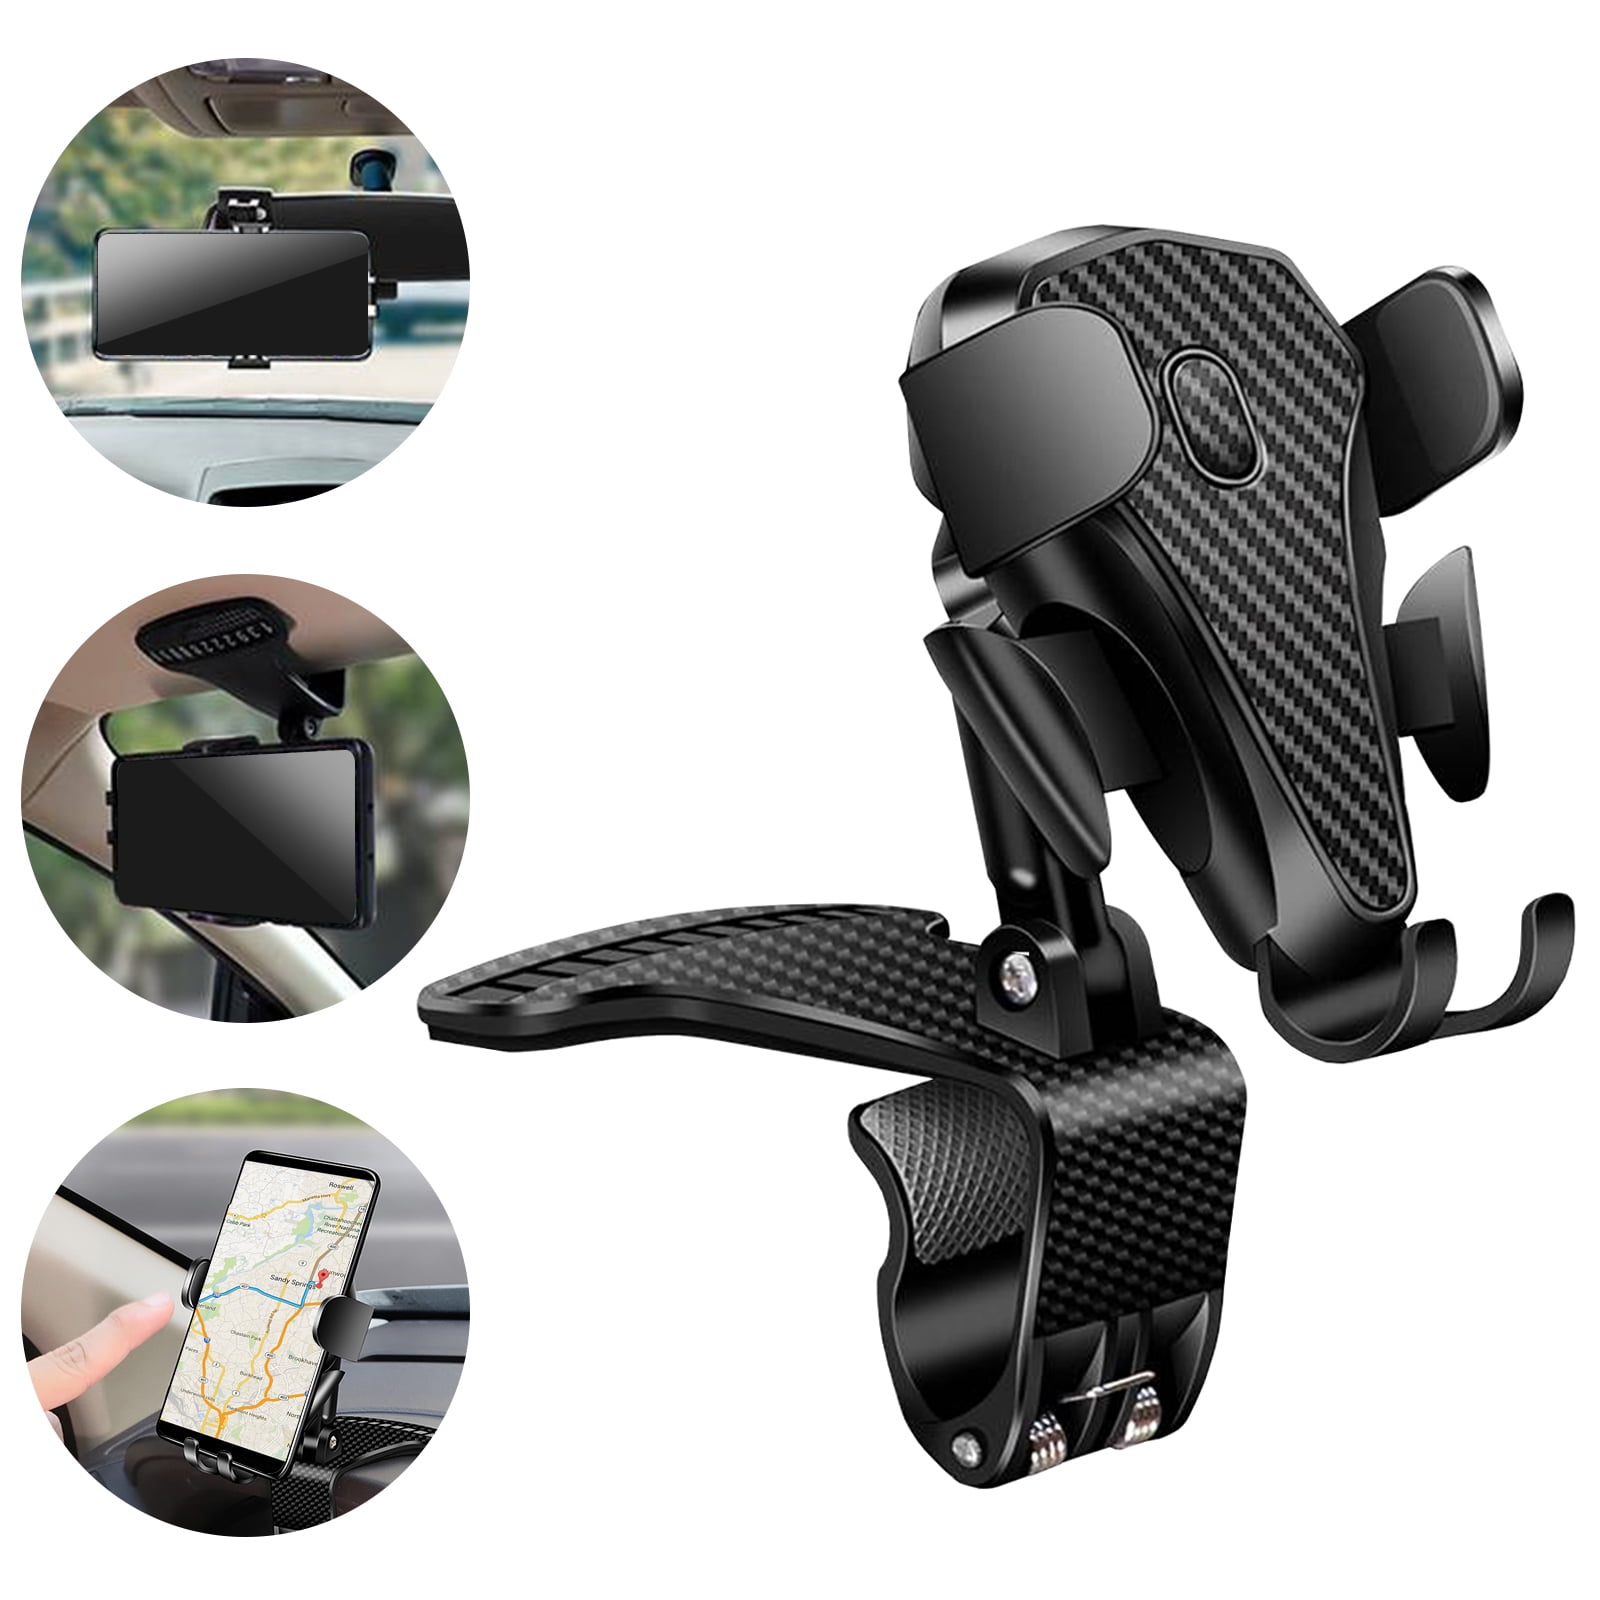 Dashboard Car Phone Holder Cradle Mount HUD for iPhone XR XS MAX Samsung GPS